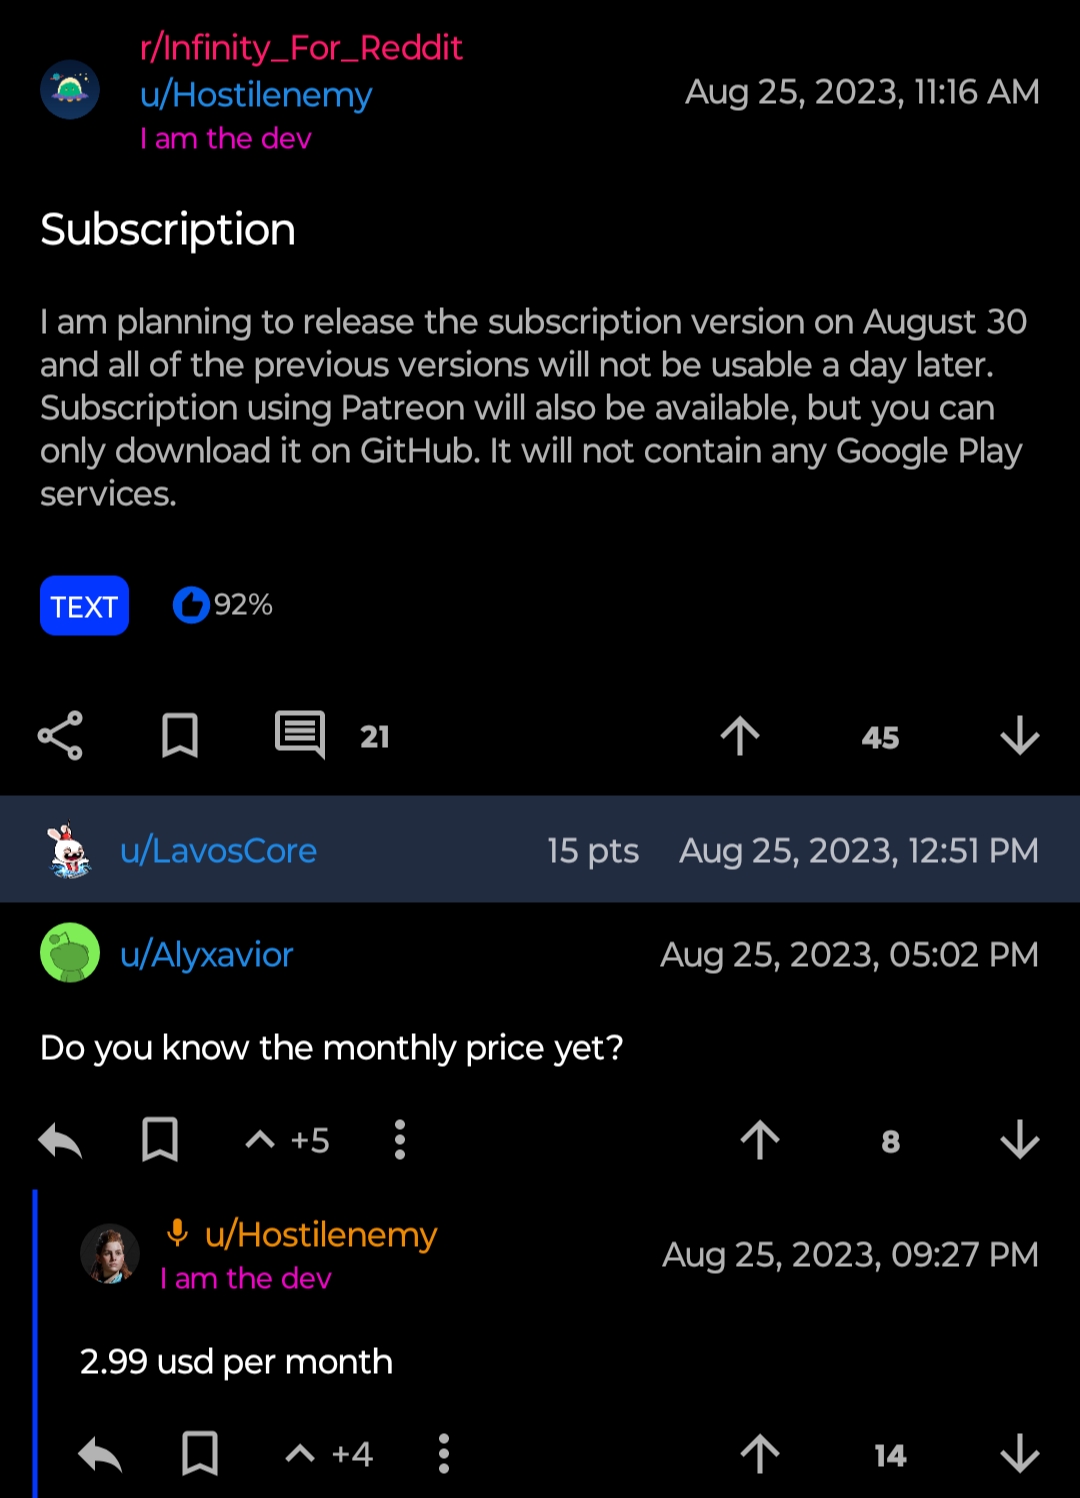 Screenshot from the official Infinity for Reddit subreddit, confirming the August 30th release date for the subscription, $2.99 per month